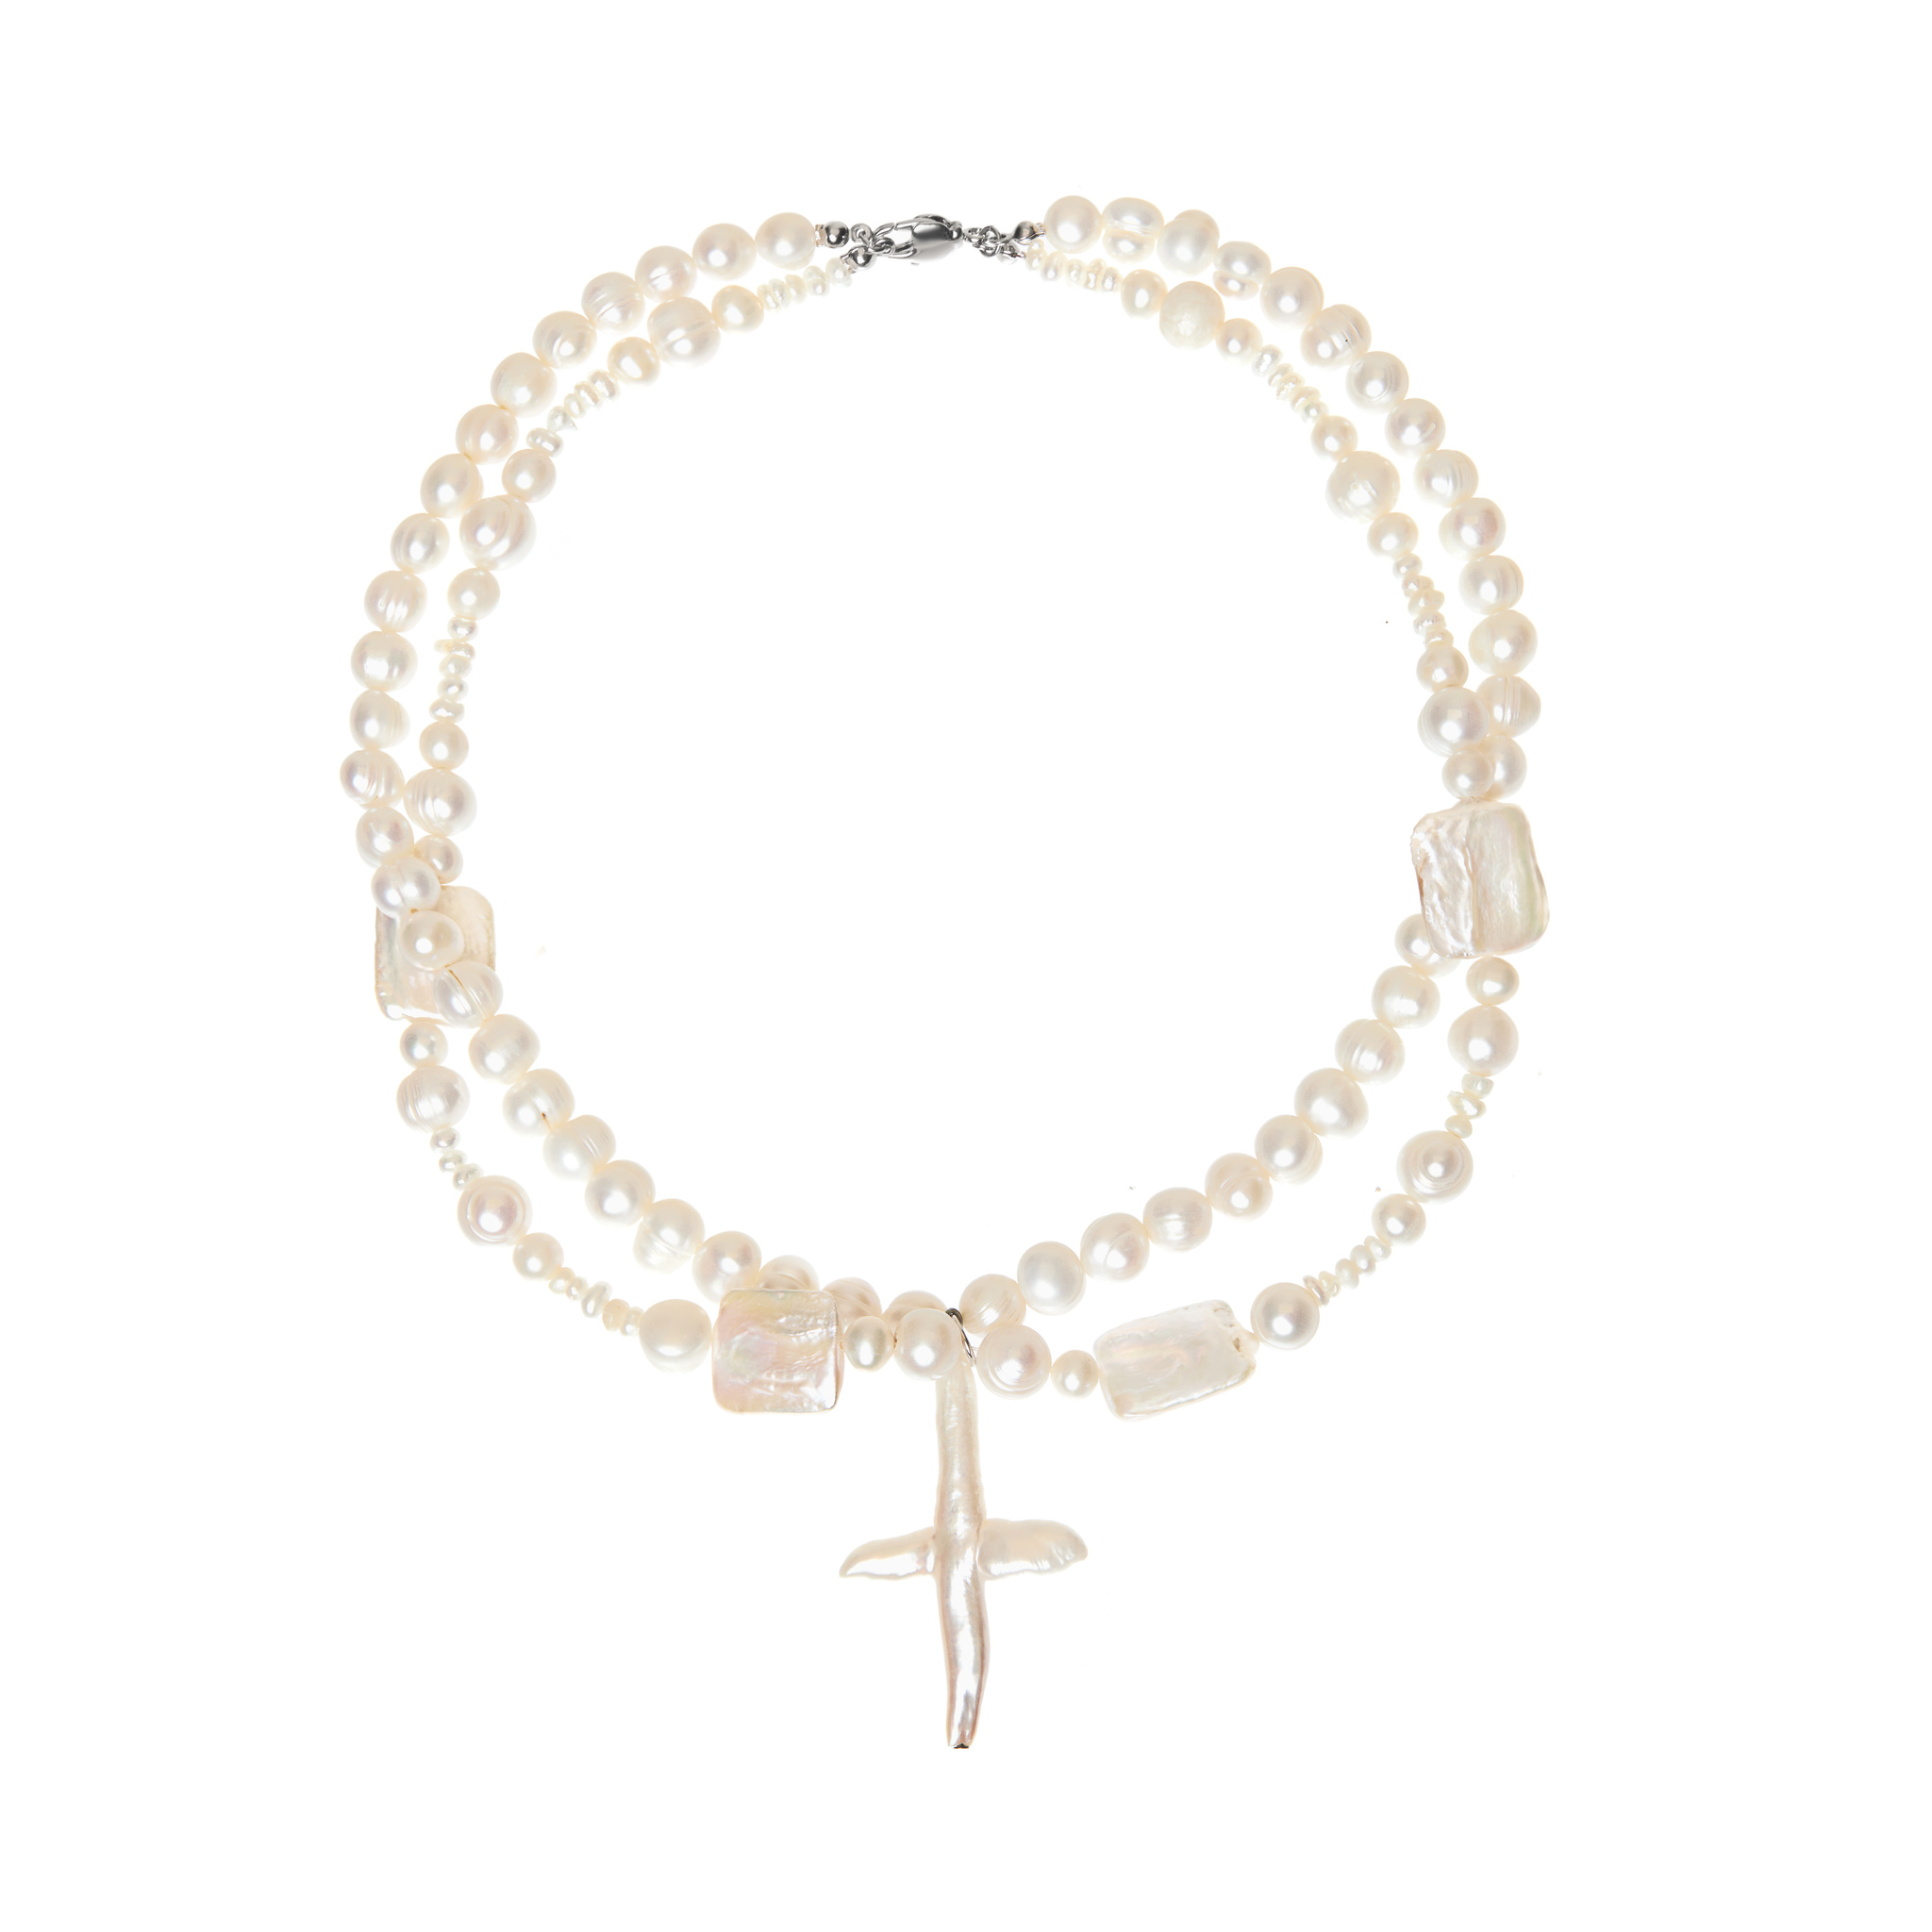 HOLLY JUNE Колье Pearly Abundance Cross Necklace – Nacre holly june серьга pearly bow earring